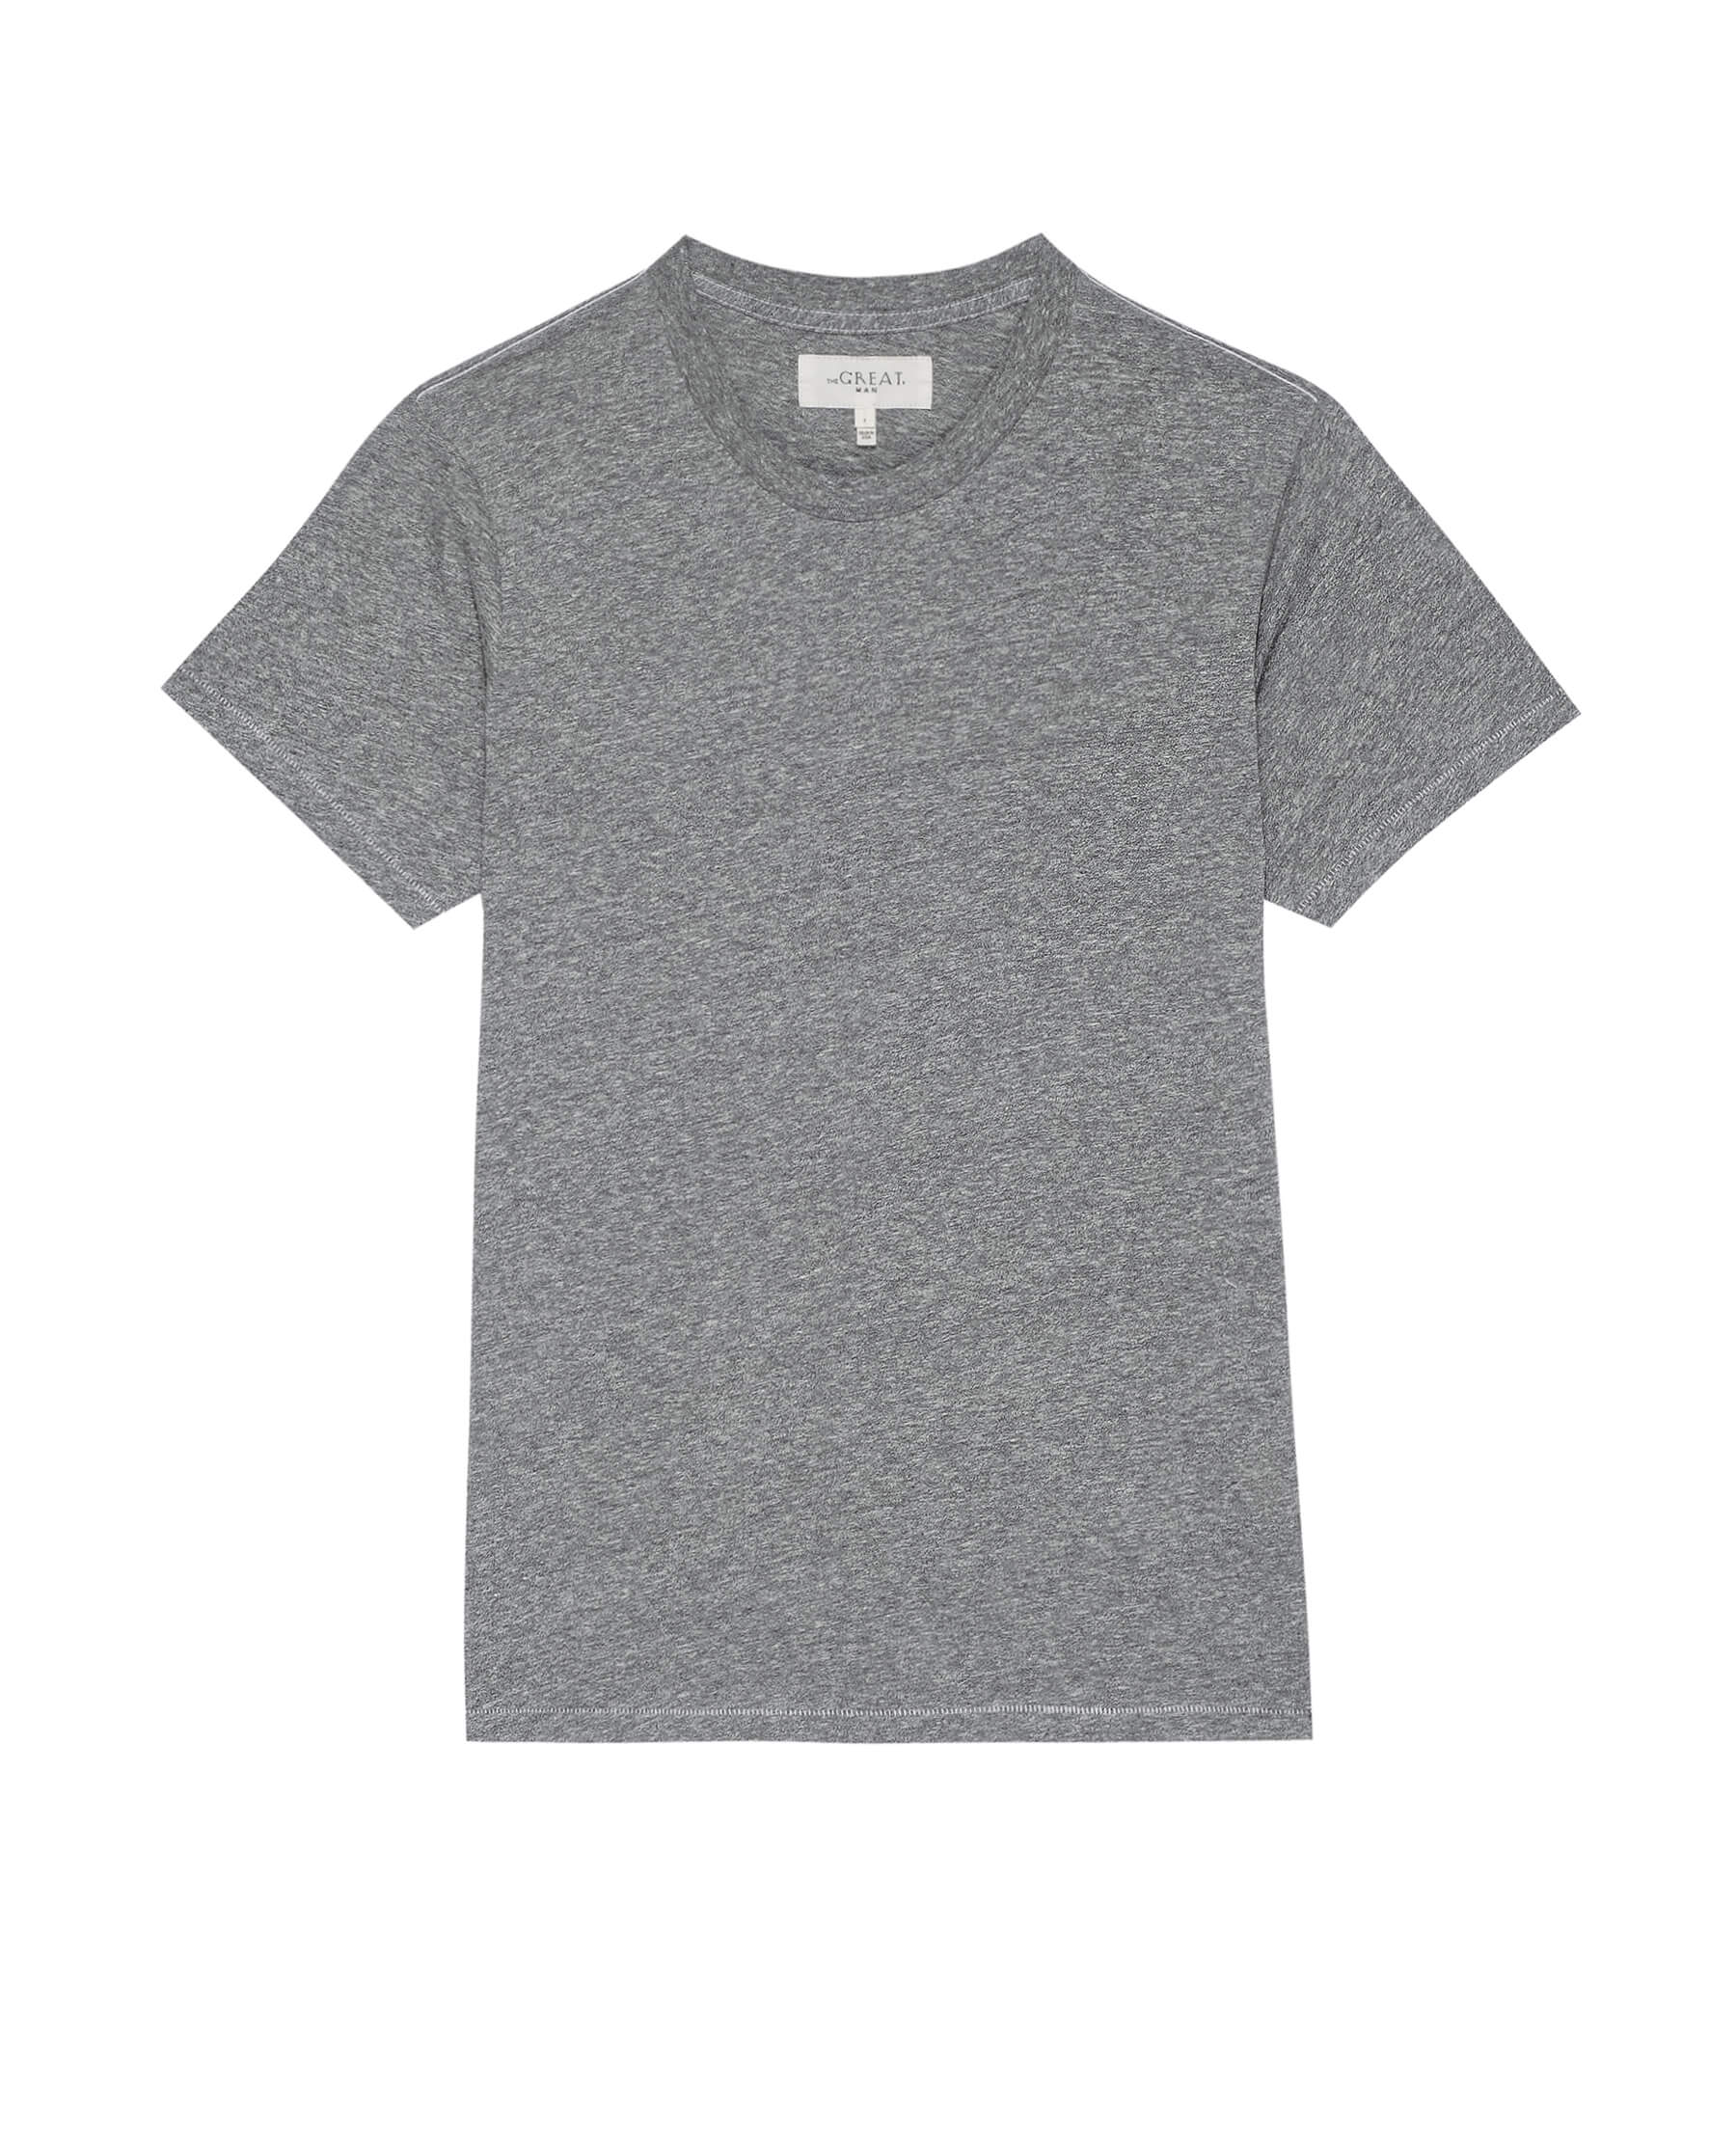 The Men's Boxy Crew. -- HEATHER GREY TEES THE GREAT. MAN